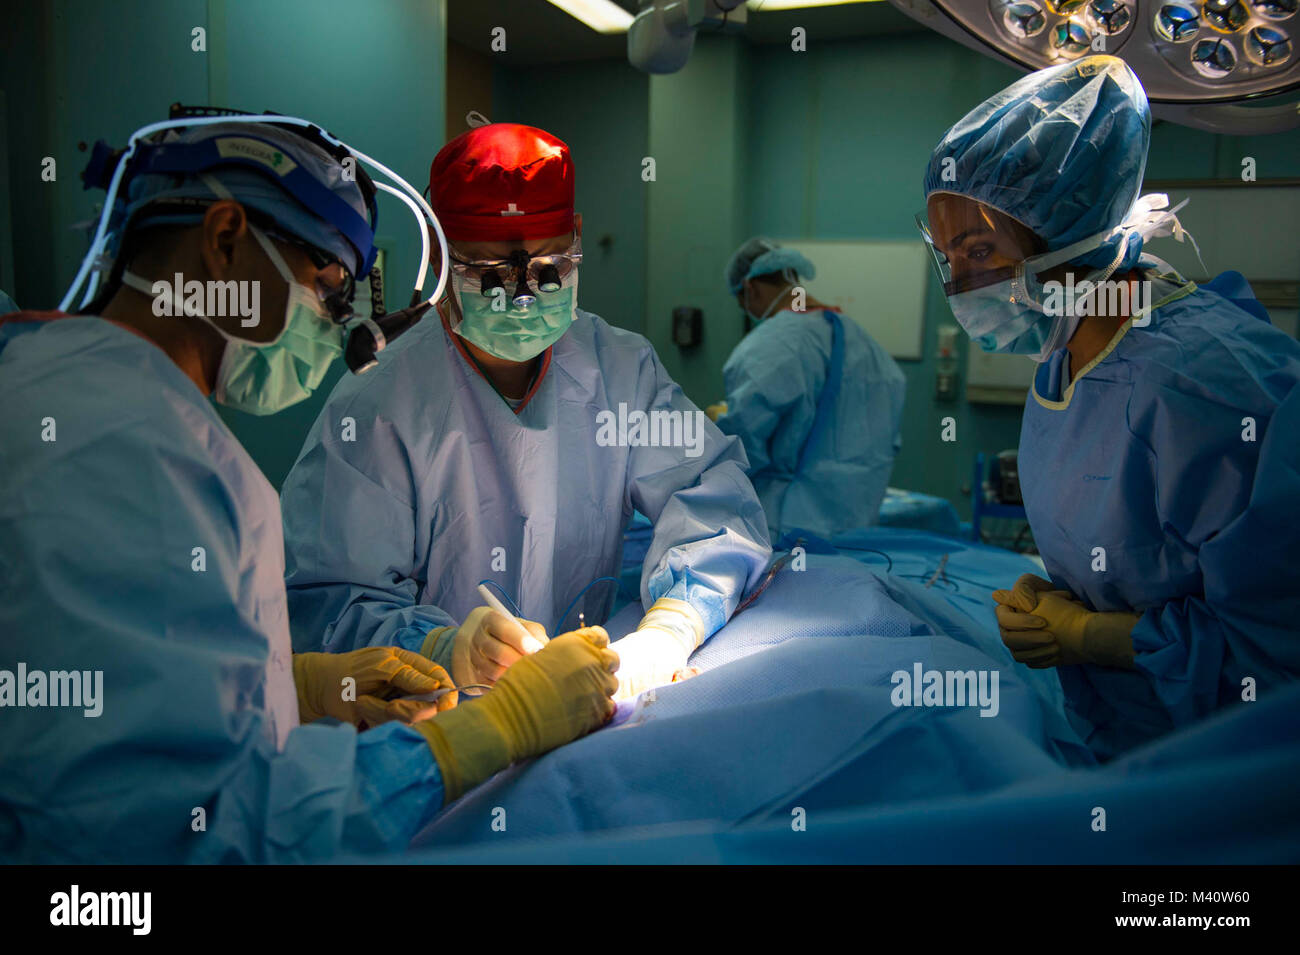 150730-N-XQ474-386 ROSEAU, DOMINICA (July 30, 2015) – Cmdr. Thomas Chung, a native of Los Angeles, Calif., and plastic surgeon assigned to Walter Reed National Military Medical Center Bethesda, Md., and medical students from Ross University School of Medicine perform surgery on a patient in an operating room aboard the Military Sealift Command hospital ship USNS Comfort (T-AH 20) during Continuing Promise 2015.  Continuing Promise is a U.S. Southern Command-sponsored and U.S. Naval Forces Southern Command/U.S. 4th Fleet-conducted deployment to conduct civil-military operations including humani Stock Photo